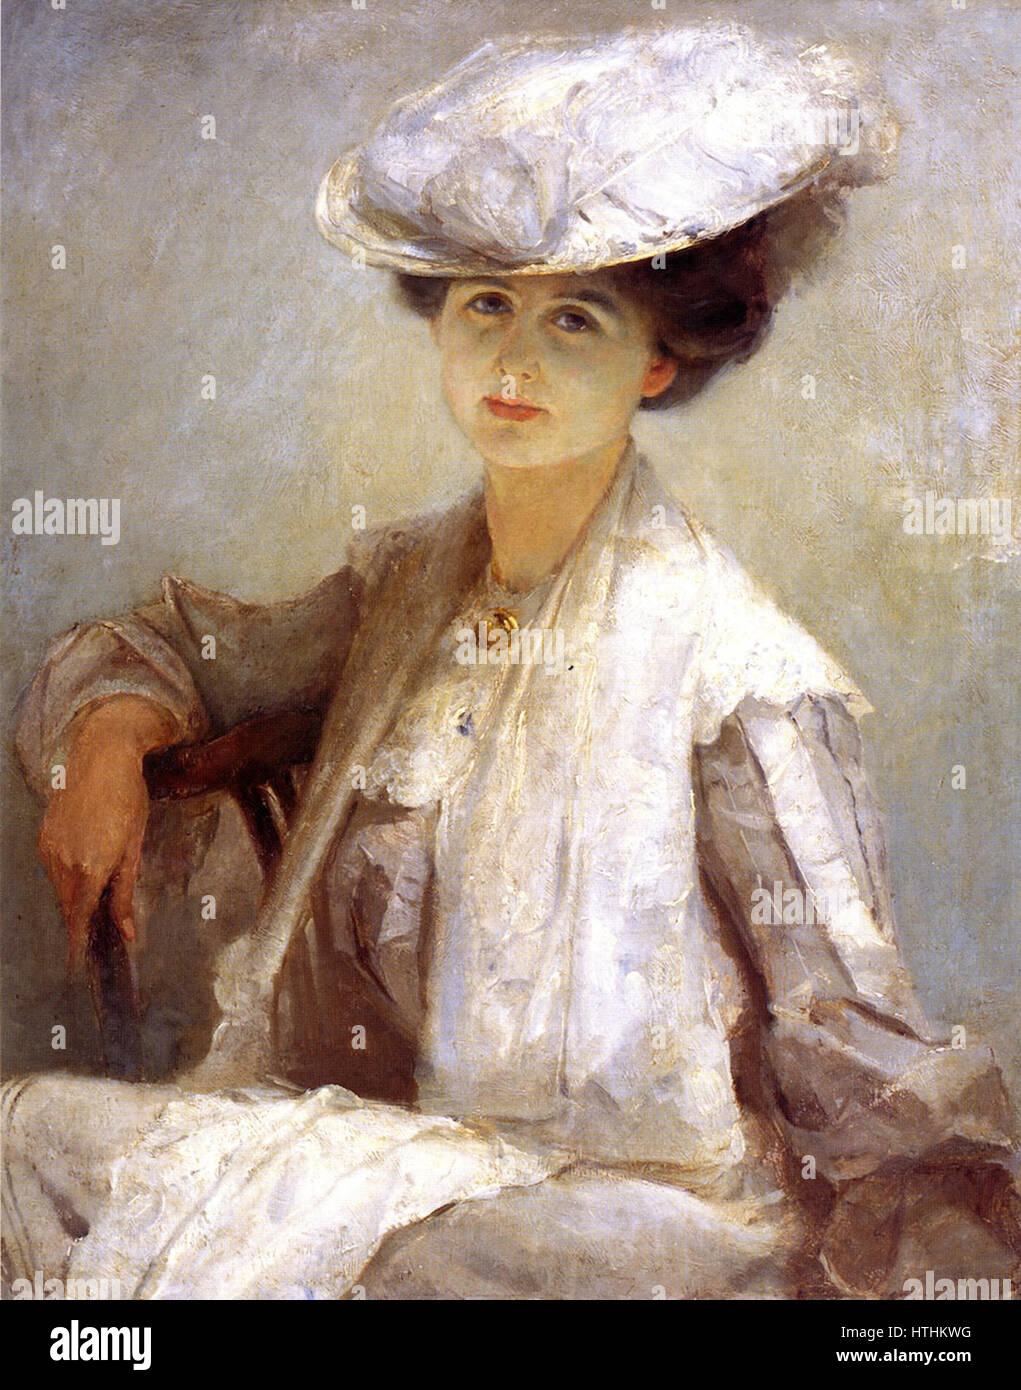 Tom Roberts, 1912 - Gray Lady onorevole Ince Foto Stock